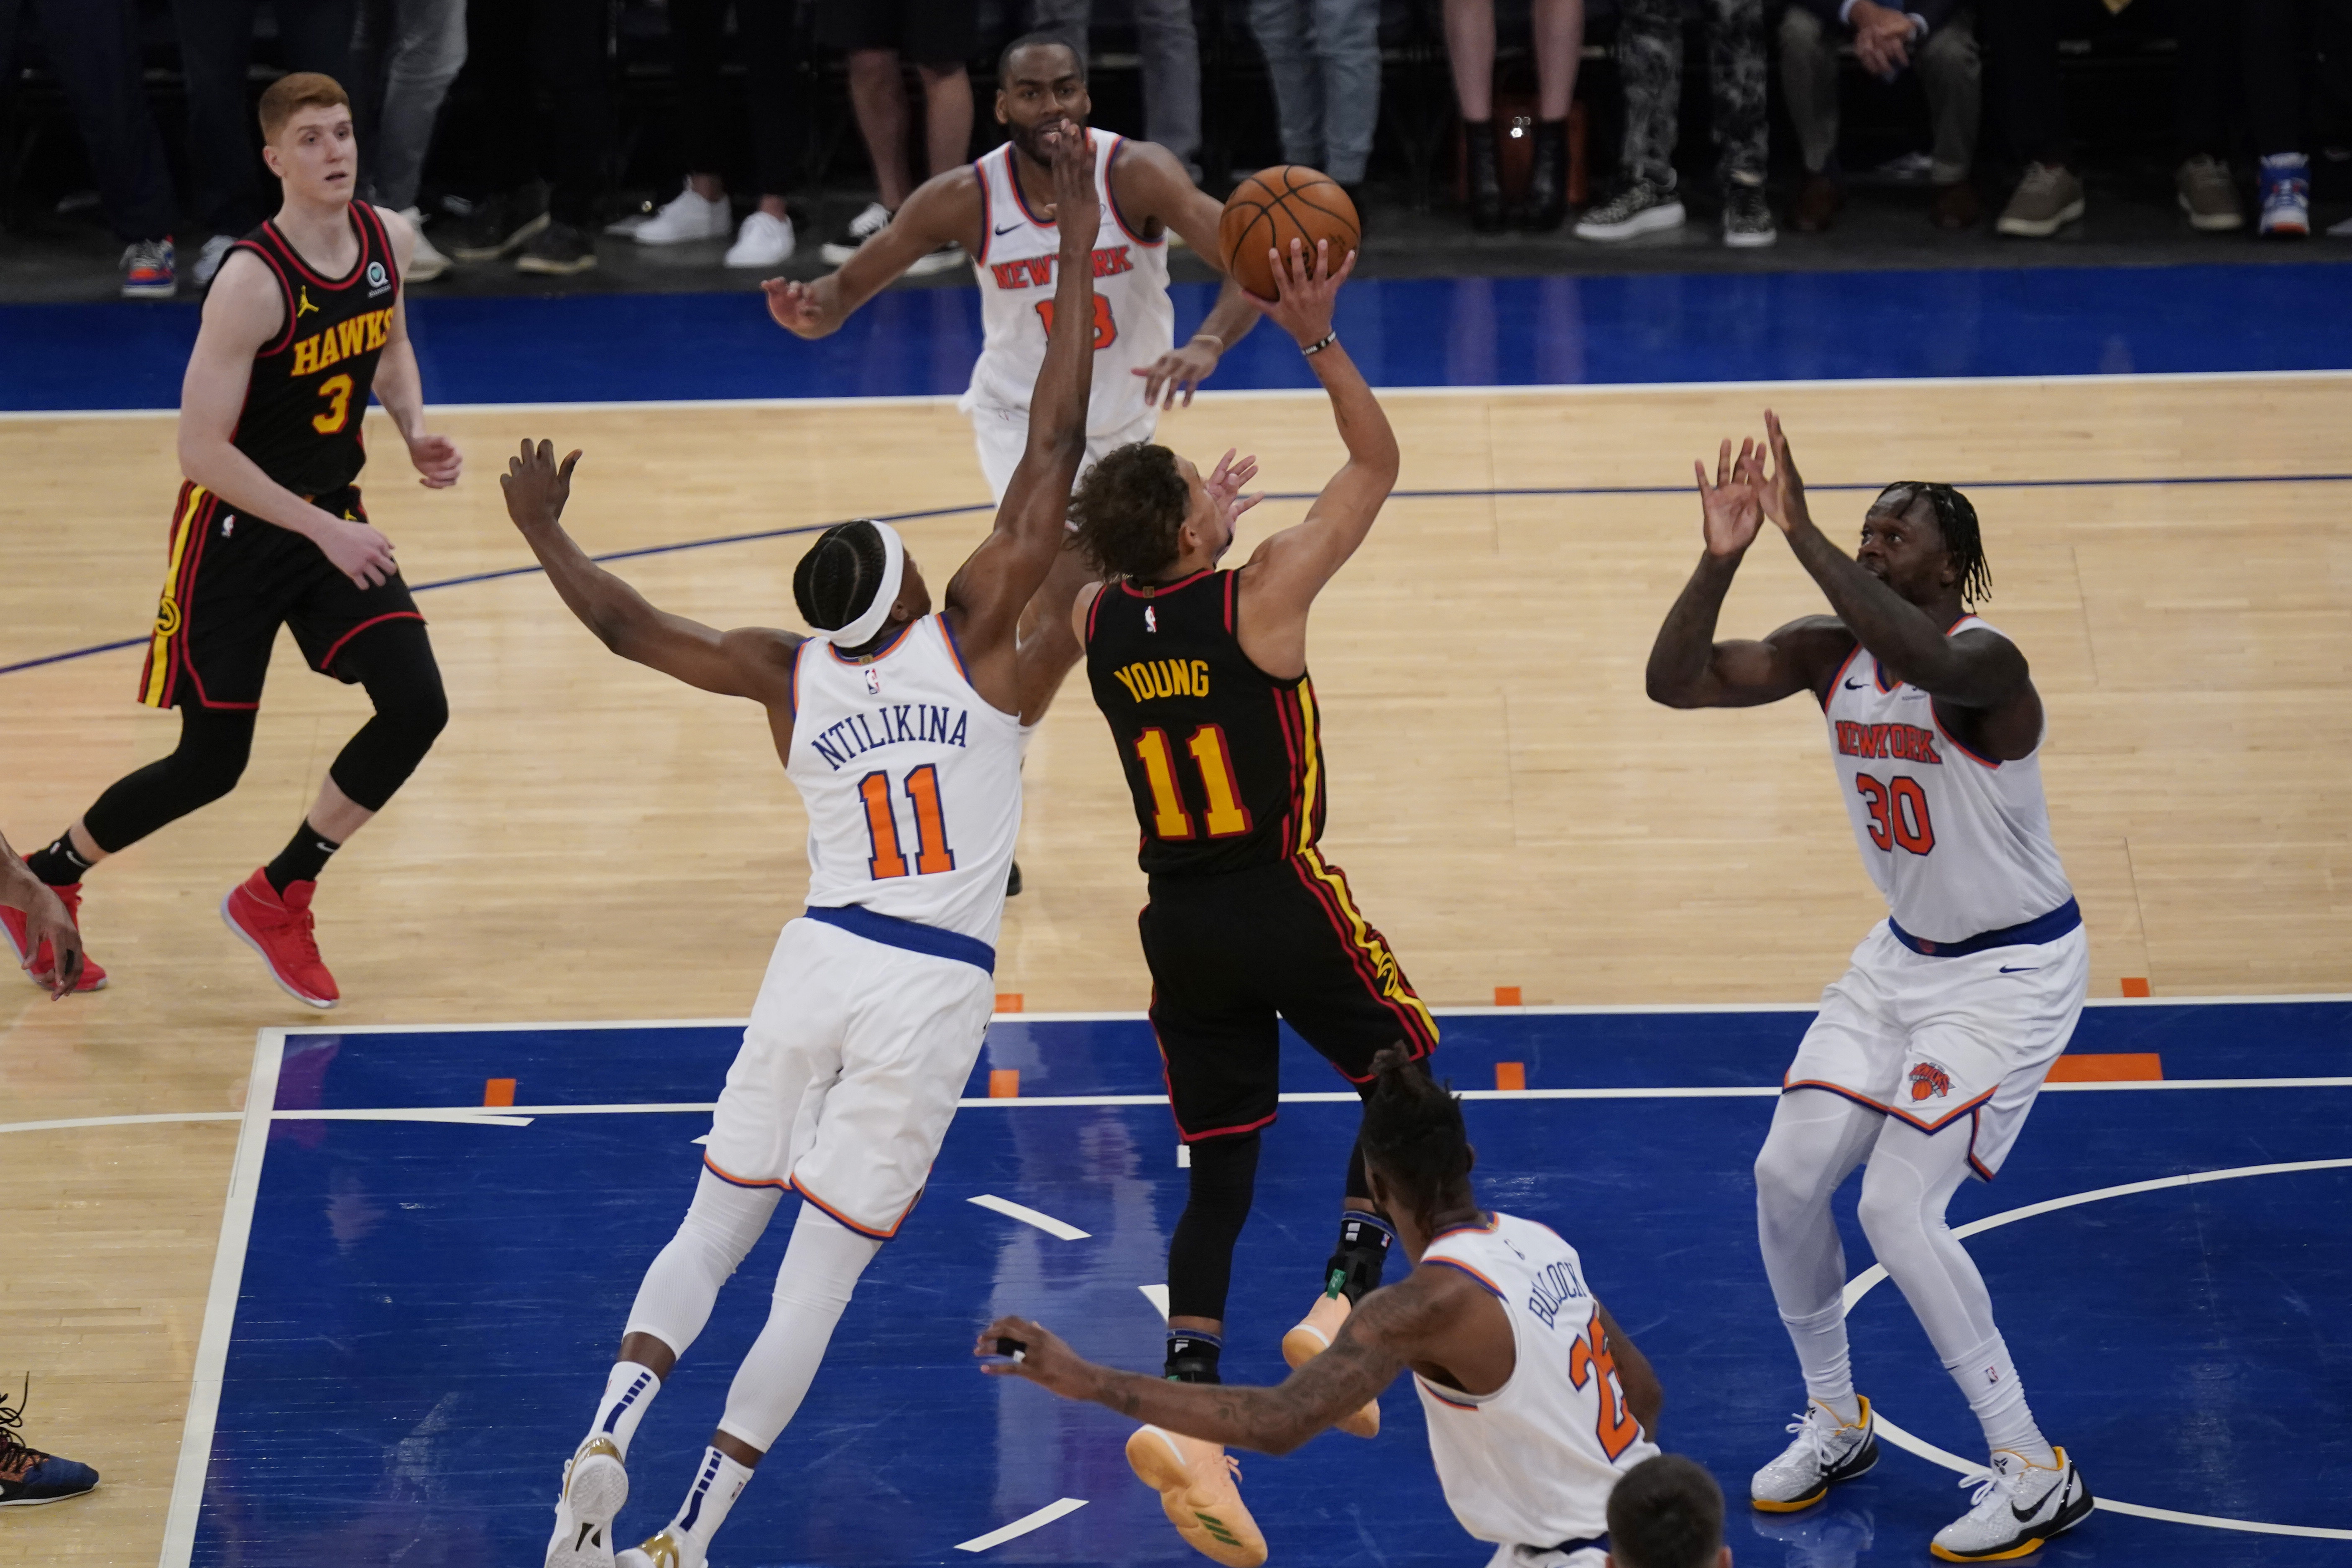 Knicks Are a Playoff Threat After Years on the Sideline - The New York Times